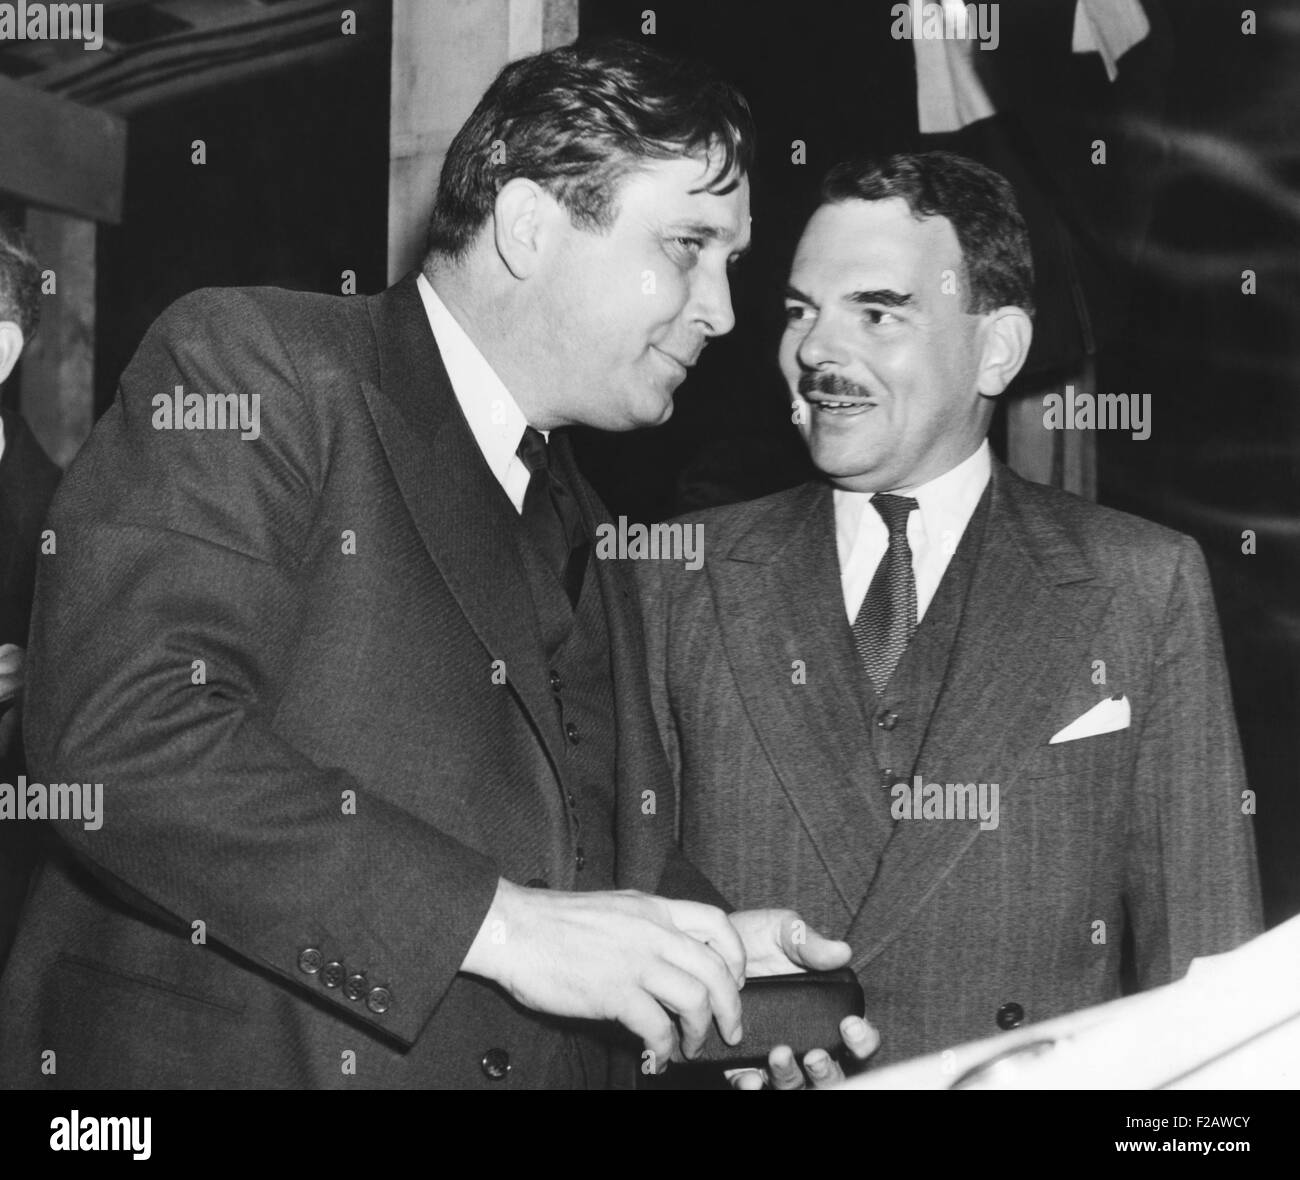 Republicans Wendell Willkie (left) with Thomas Dewey, his former rival for GOP nomination. Sept. 28, 1940. Wilkie addressed a crowd of more than 50,000 Republicans at Empire City Race Track, Yonkers, New York. Said Willkie: 'I want to say to you that if we do not prevail this Fall, this way of life will fall.' (CSU 2015 11 1398) Stock Photo